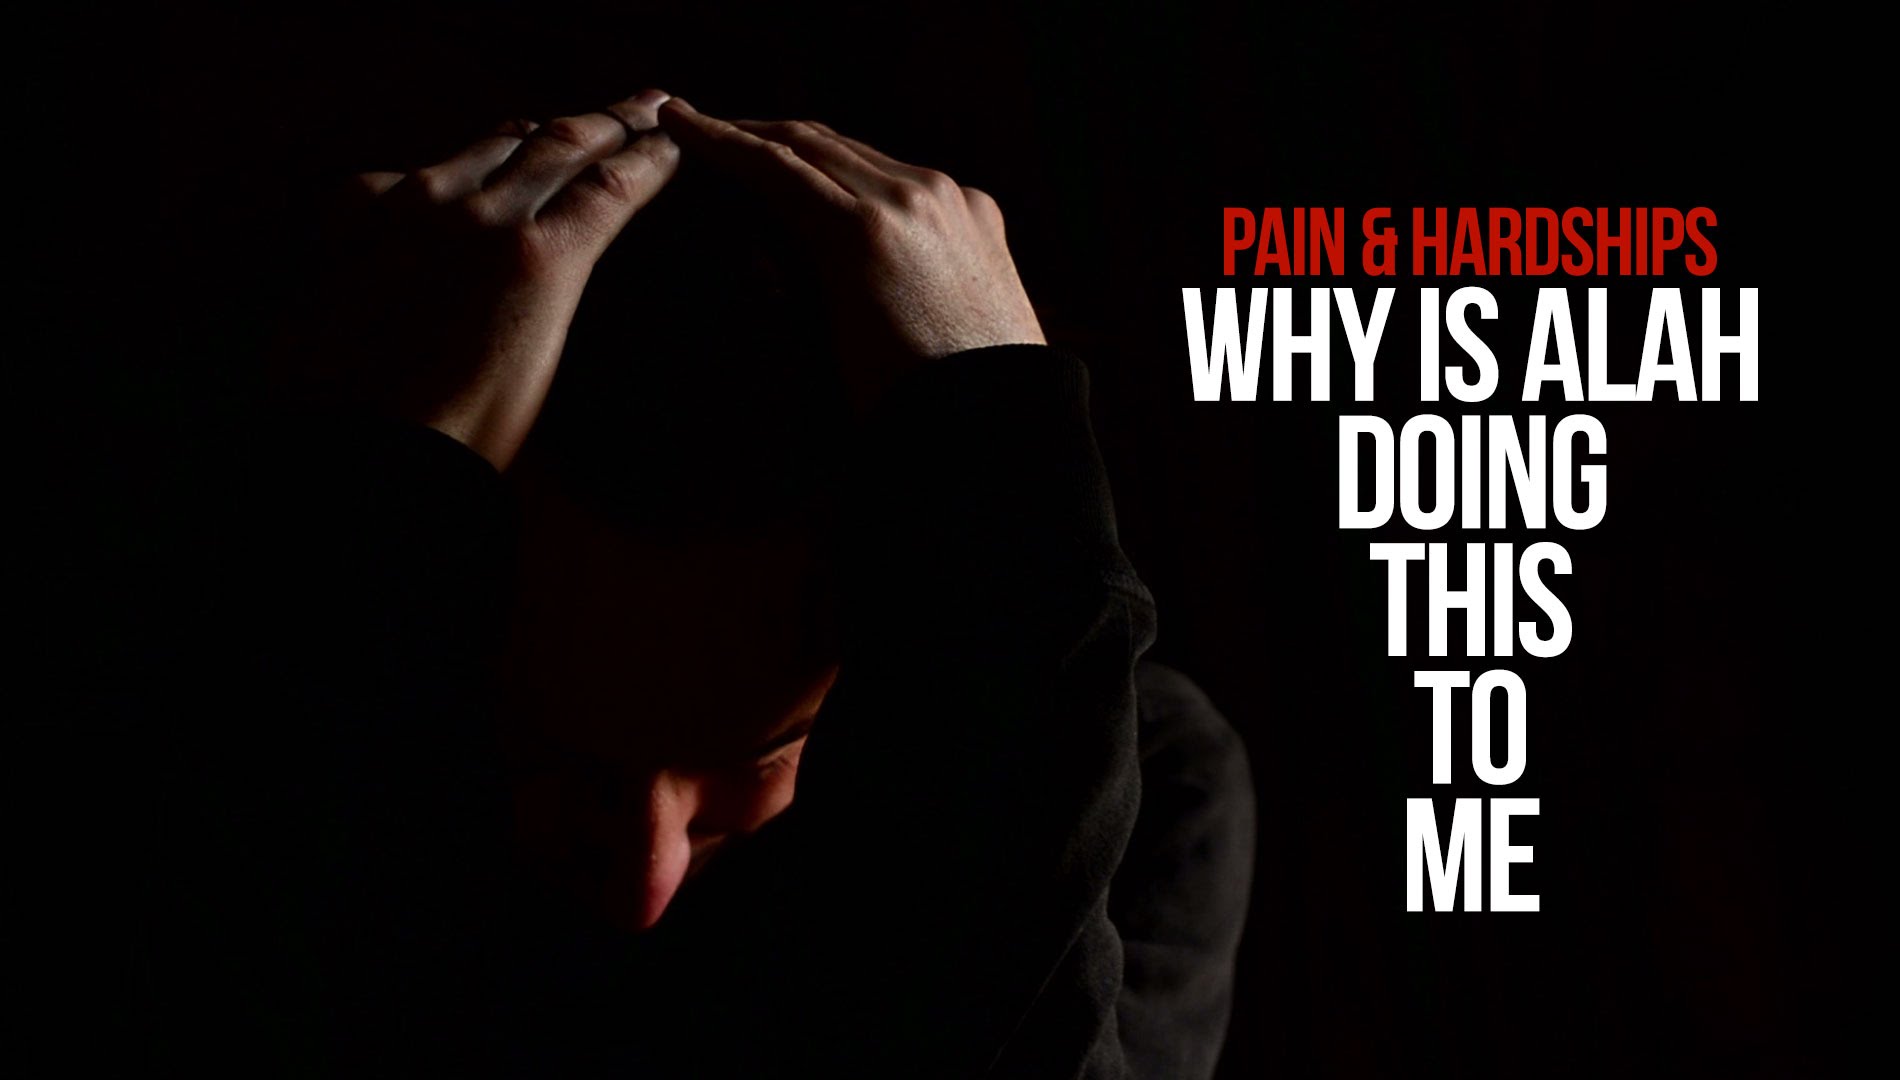 Pain & Hardship - Why is Allah Doing This To Me?